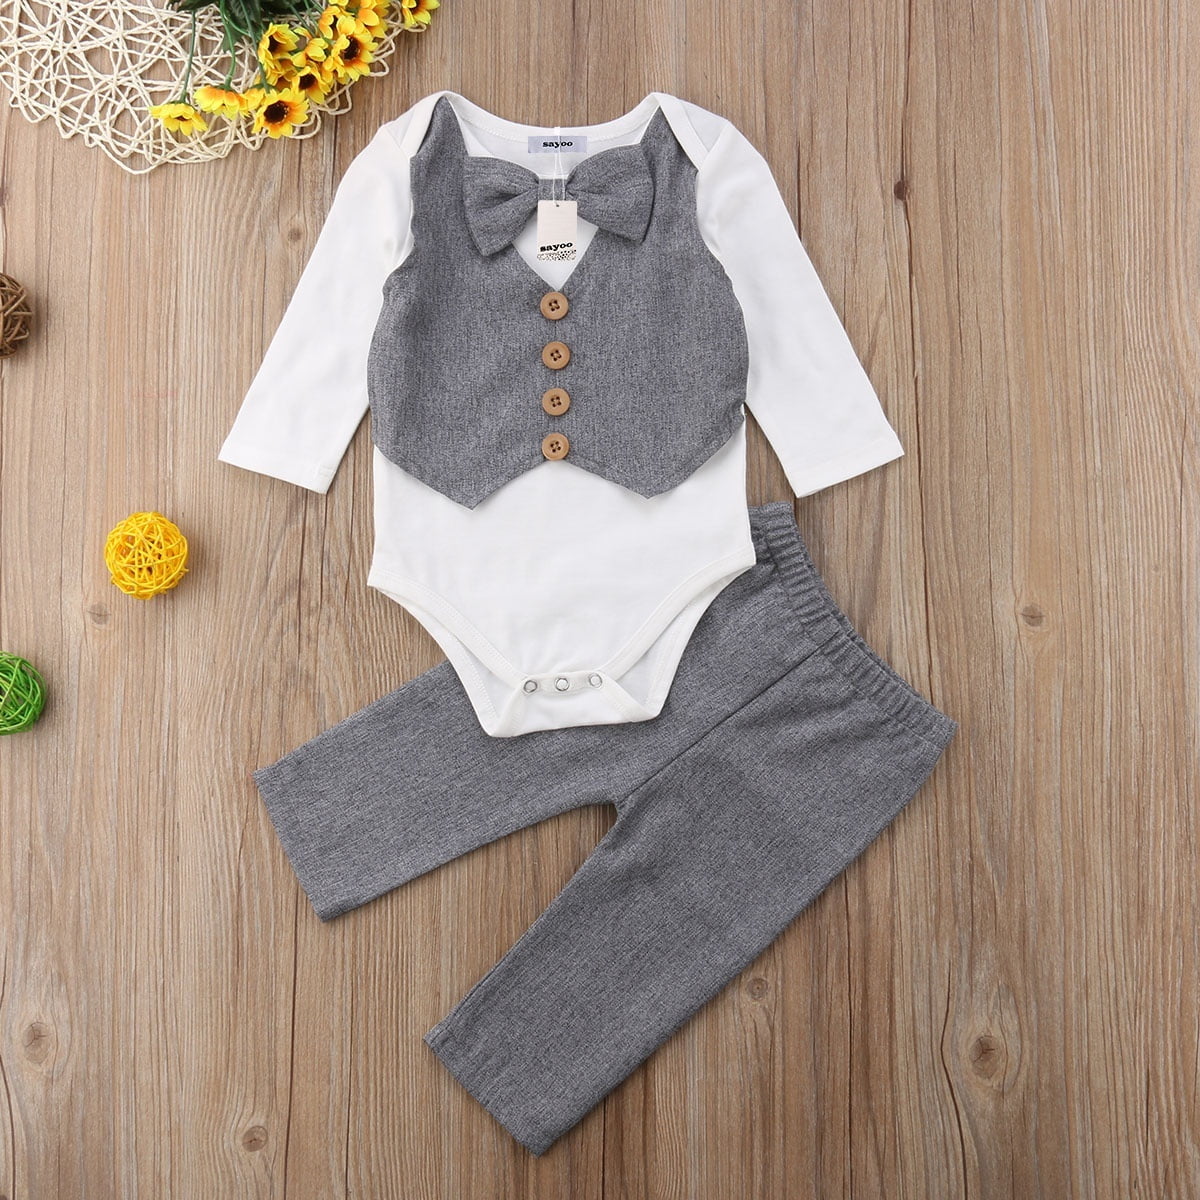 Wedding Gentlemen Formal Suit Romper Tops Pants Clothes Outfits for Baby Boys 